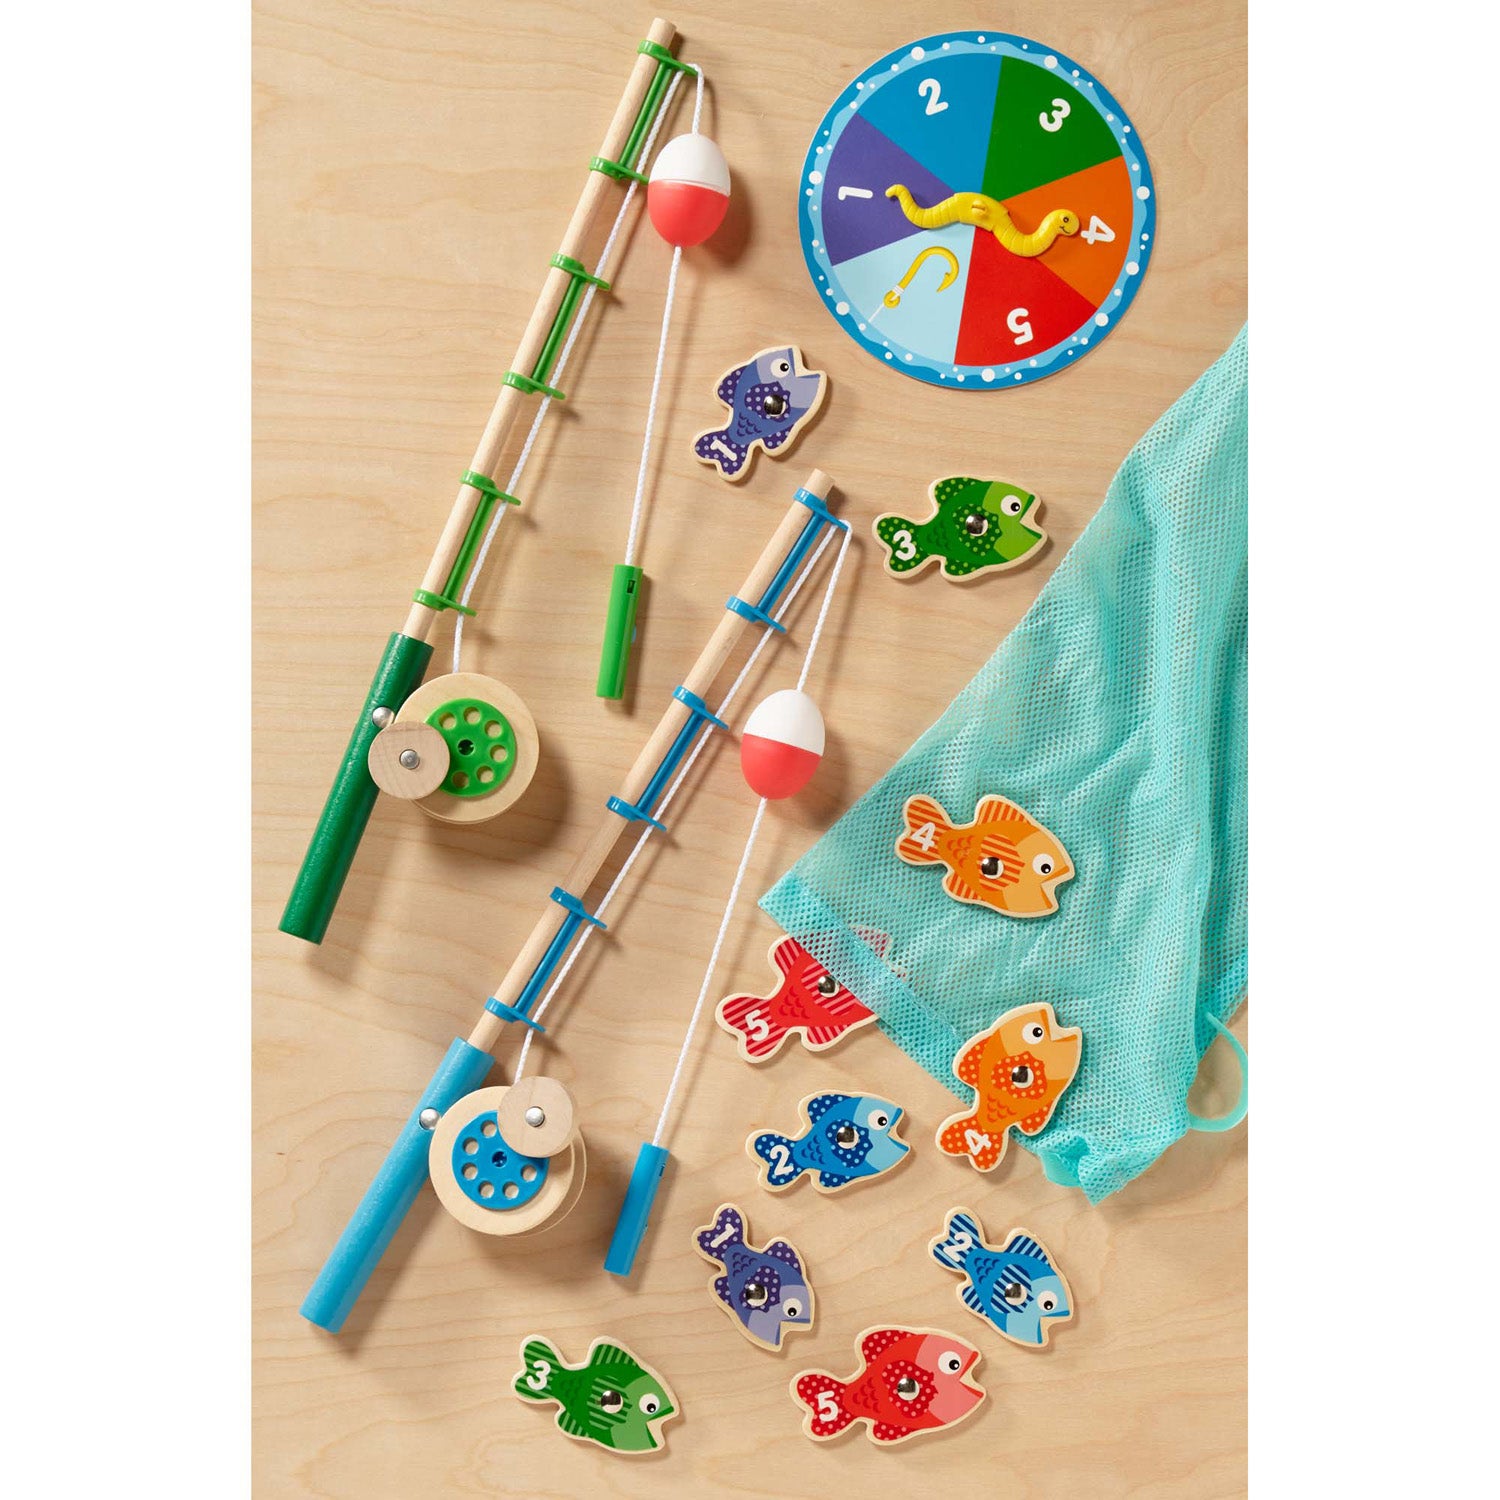 Magnetic Fishing Rod Toy Set Fun Time Fishing Game With 1 Fishing Rod and 6  Cute Fishes for Children Toys Gifts Random Color - Realistic Reborn Dolls  for Sale